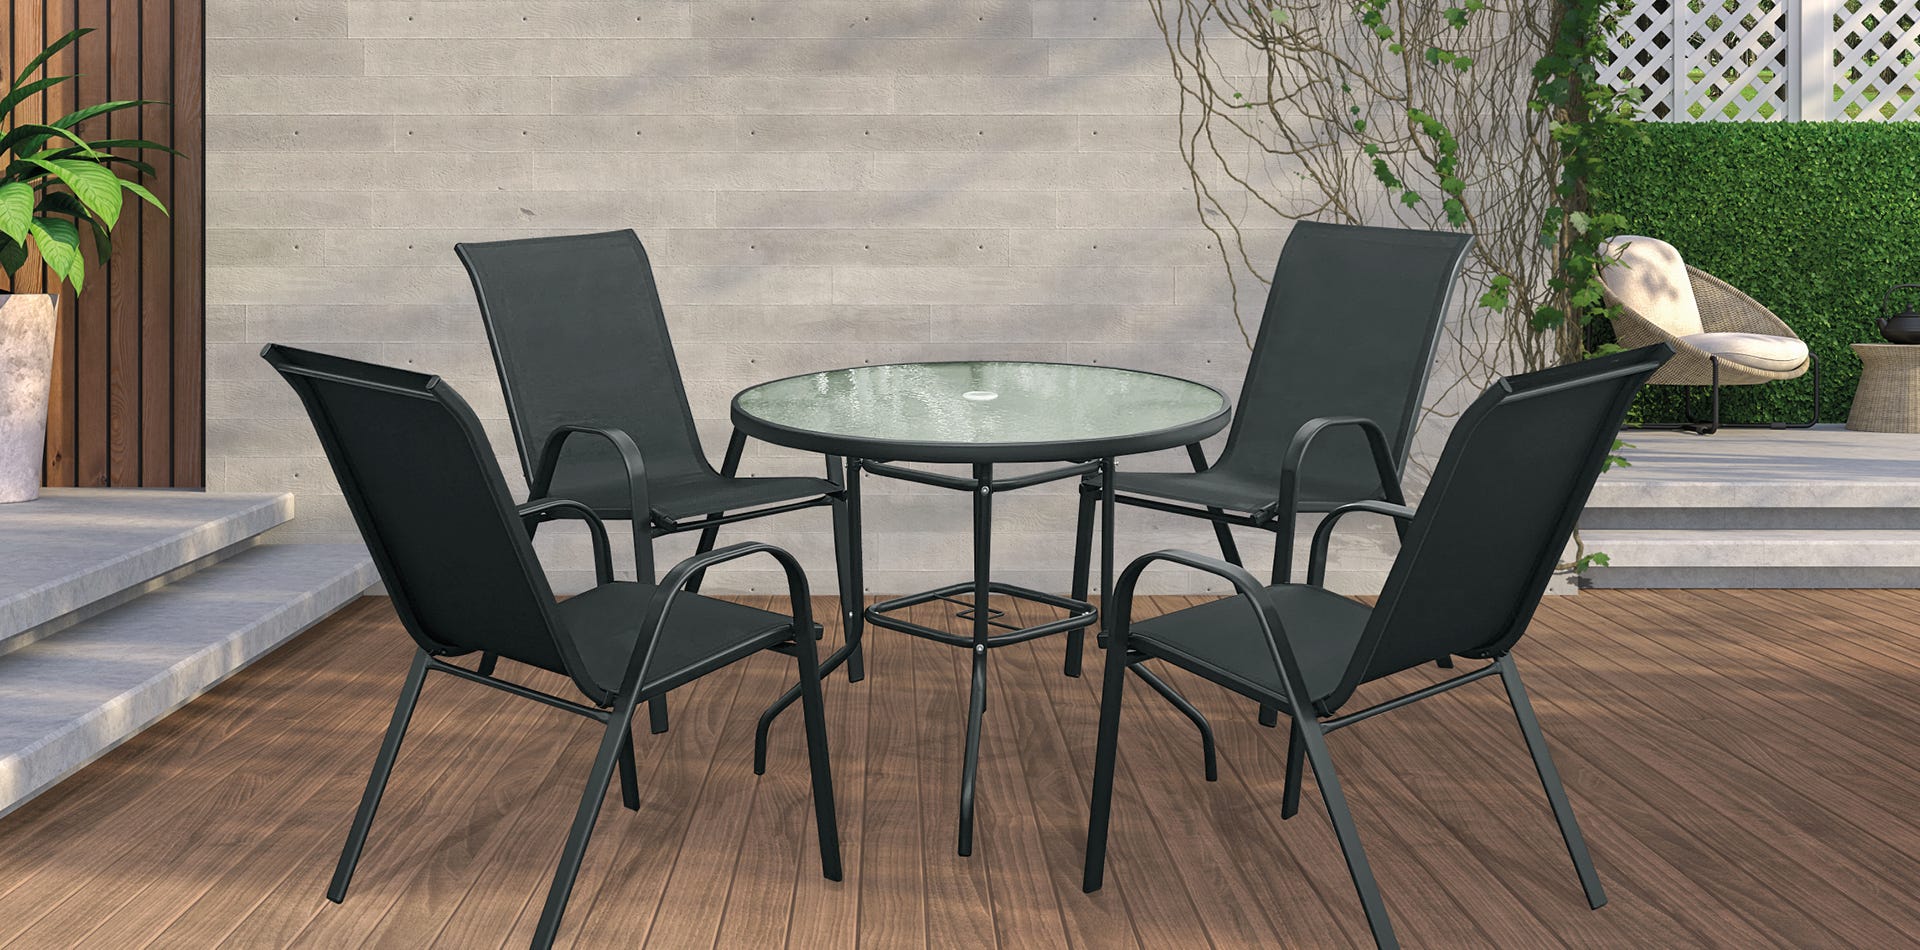 Set of aluminum round table with 4 chairs | Oudoor furniture